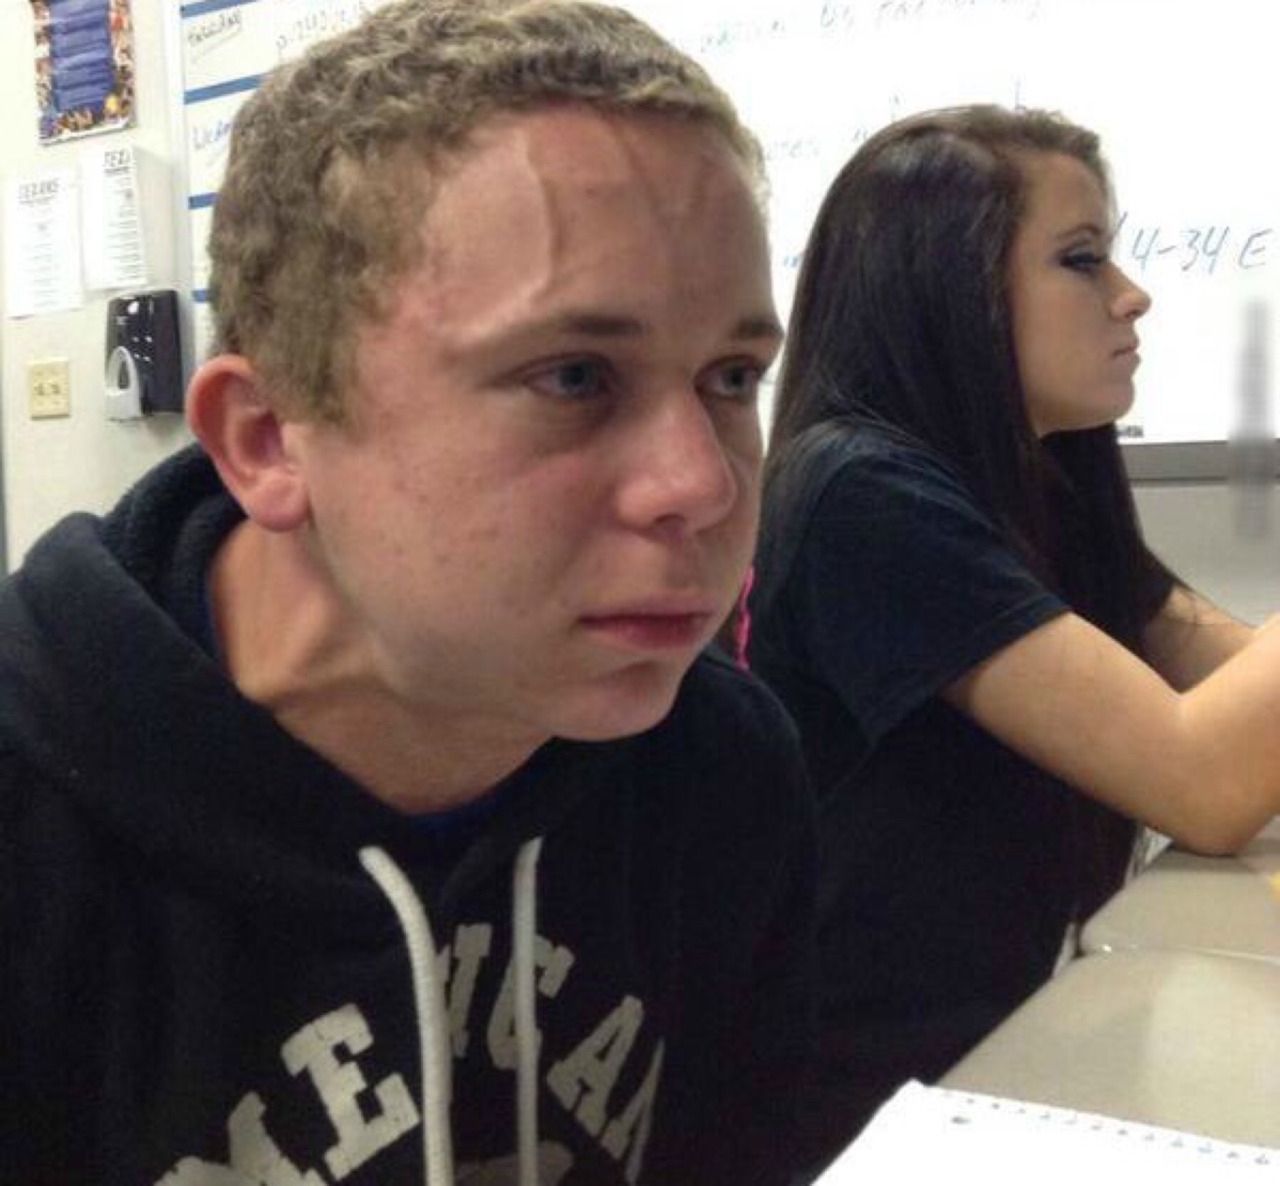 When you are HugeLoL and you haven't made a new trend in 15 minutes.